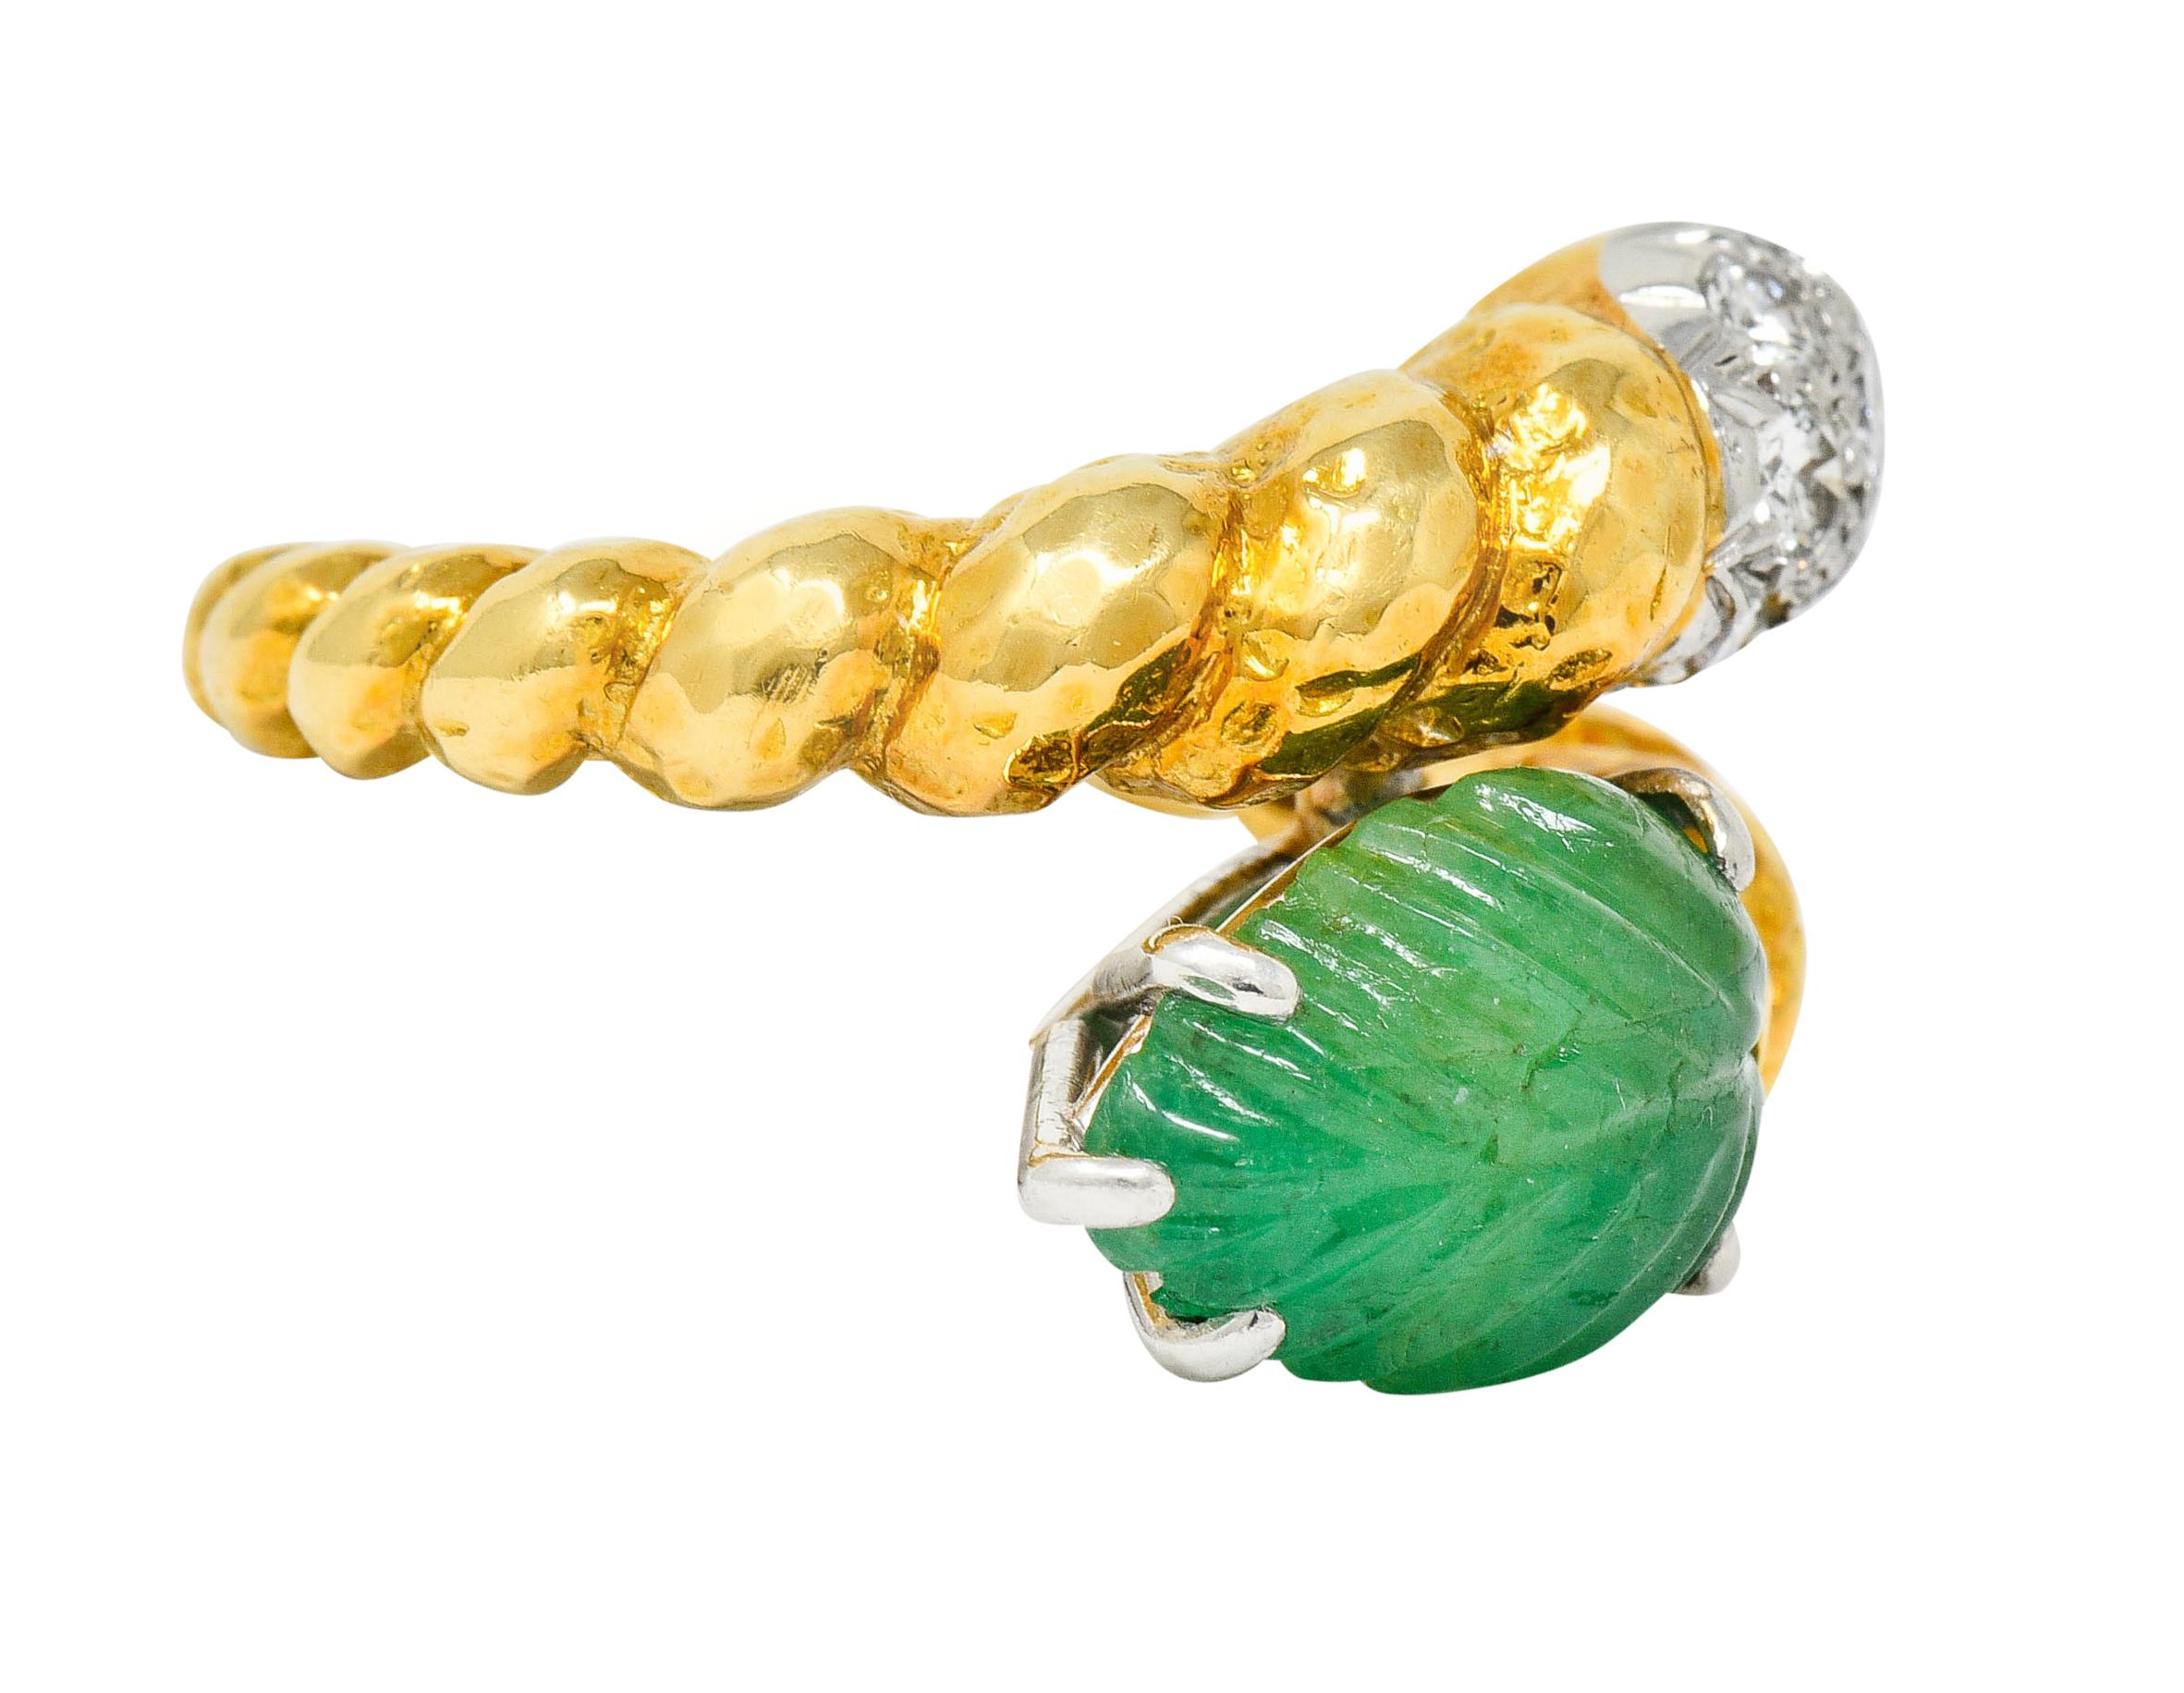 Gold bypass ring designed as a twisted rope motif with a slight hammered finish
Featuring a deeply carved emerald, basket set in platinum, and depicting a stylized leaf measuring approximately 12.0 x 8.5 mm

Translucent with natural inclusions and